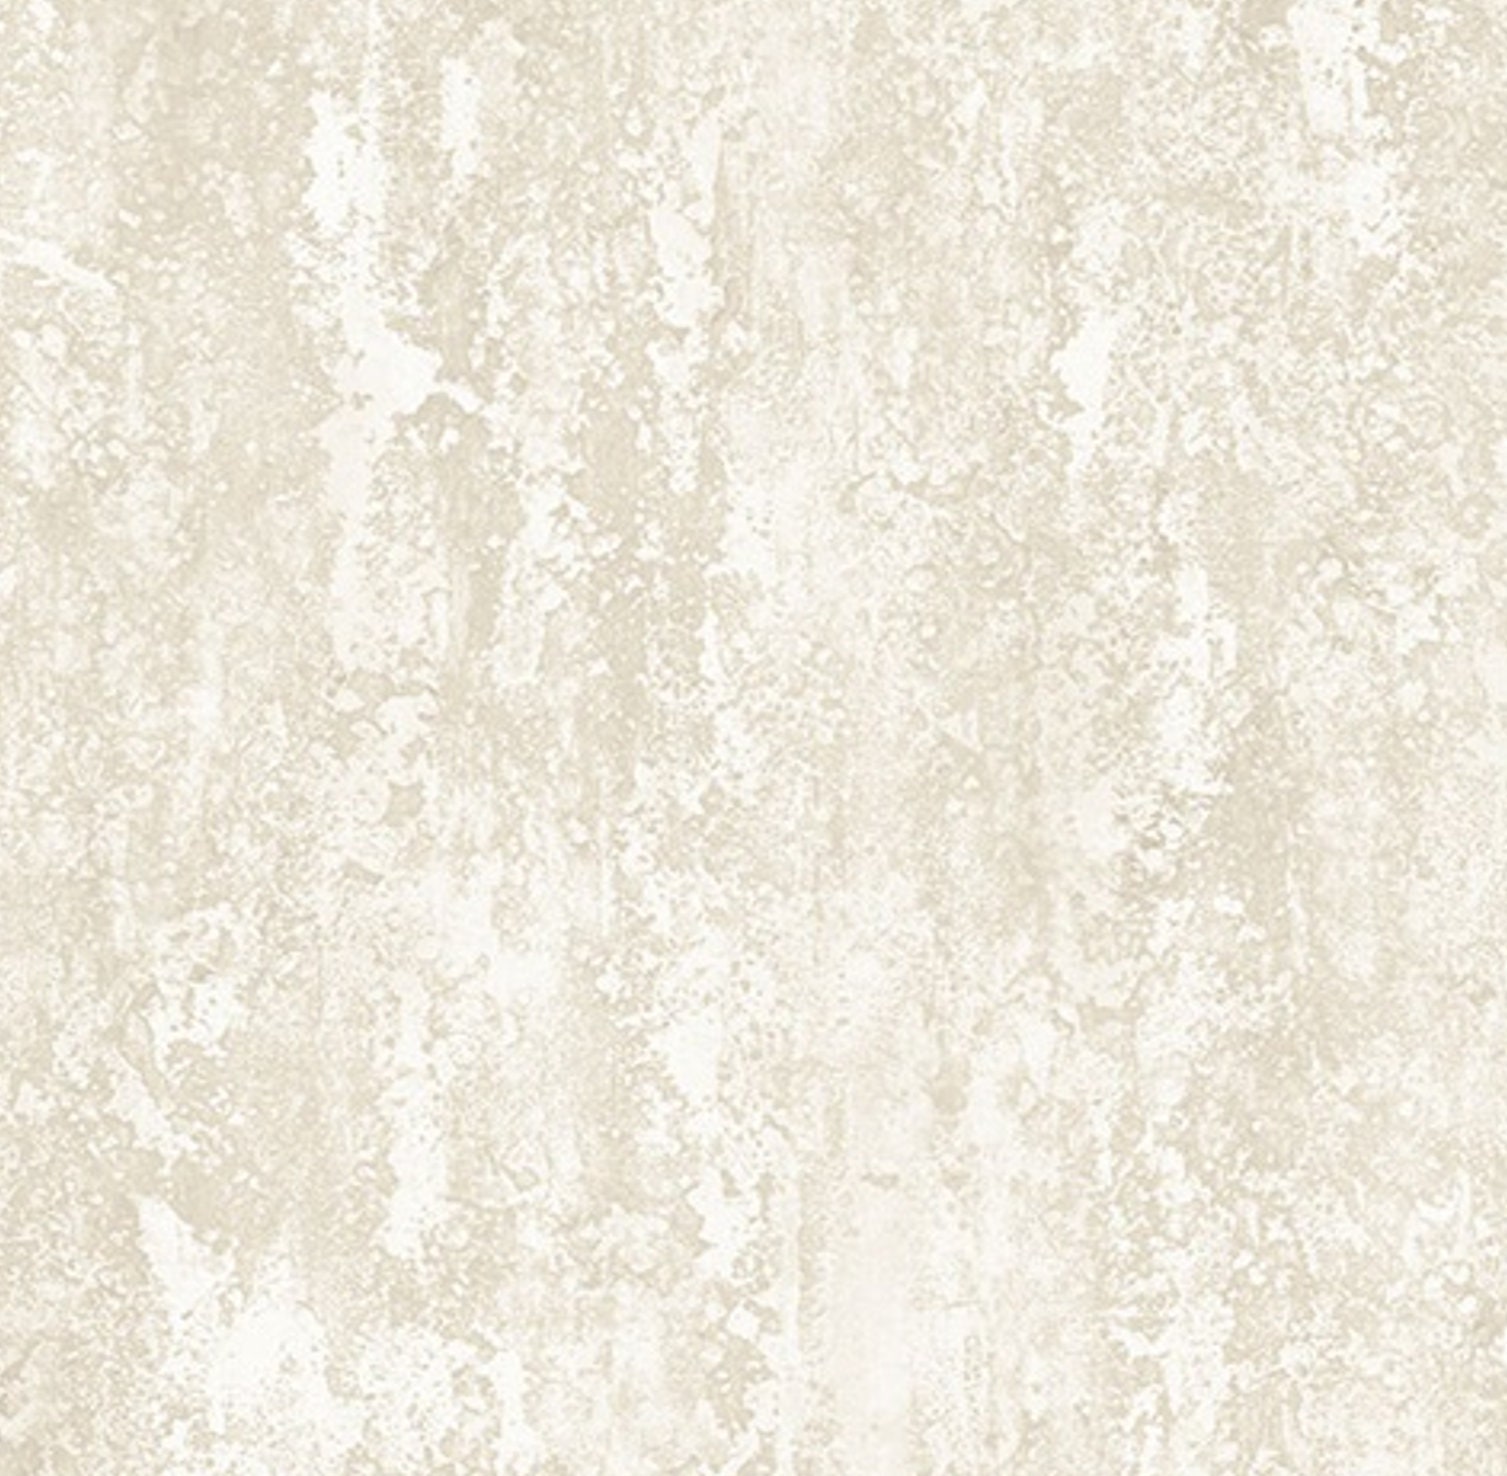 Weathered Stucco Wallpaper Peeling Faded Paint Look Faux - Etsy